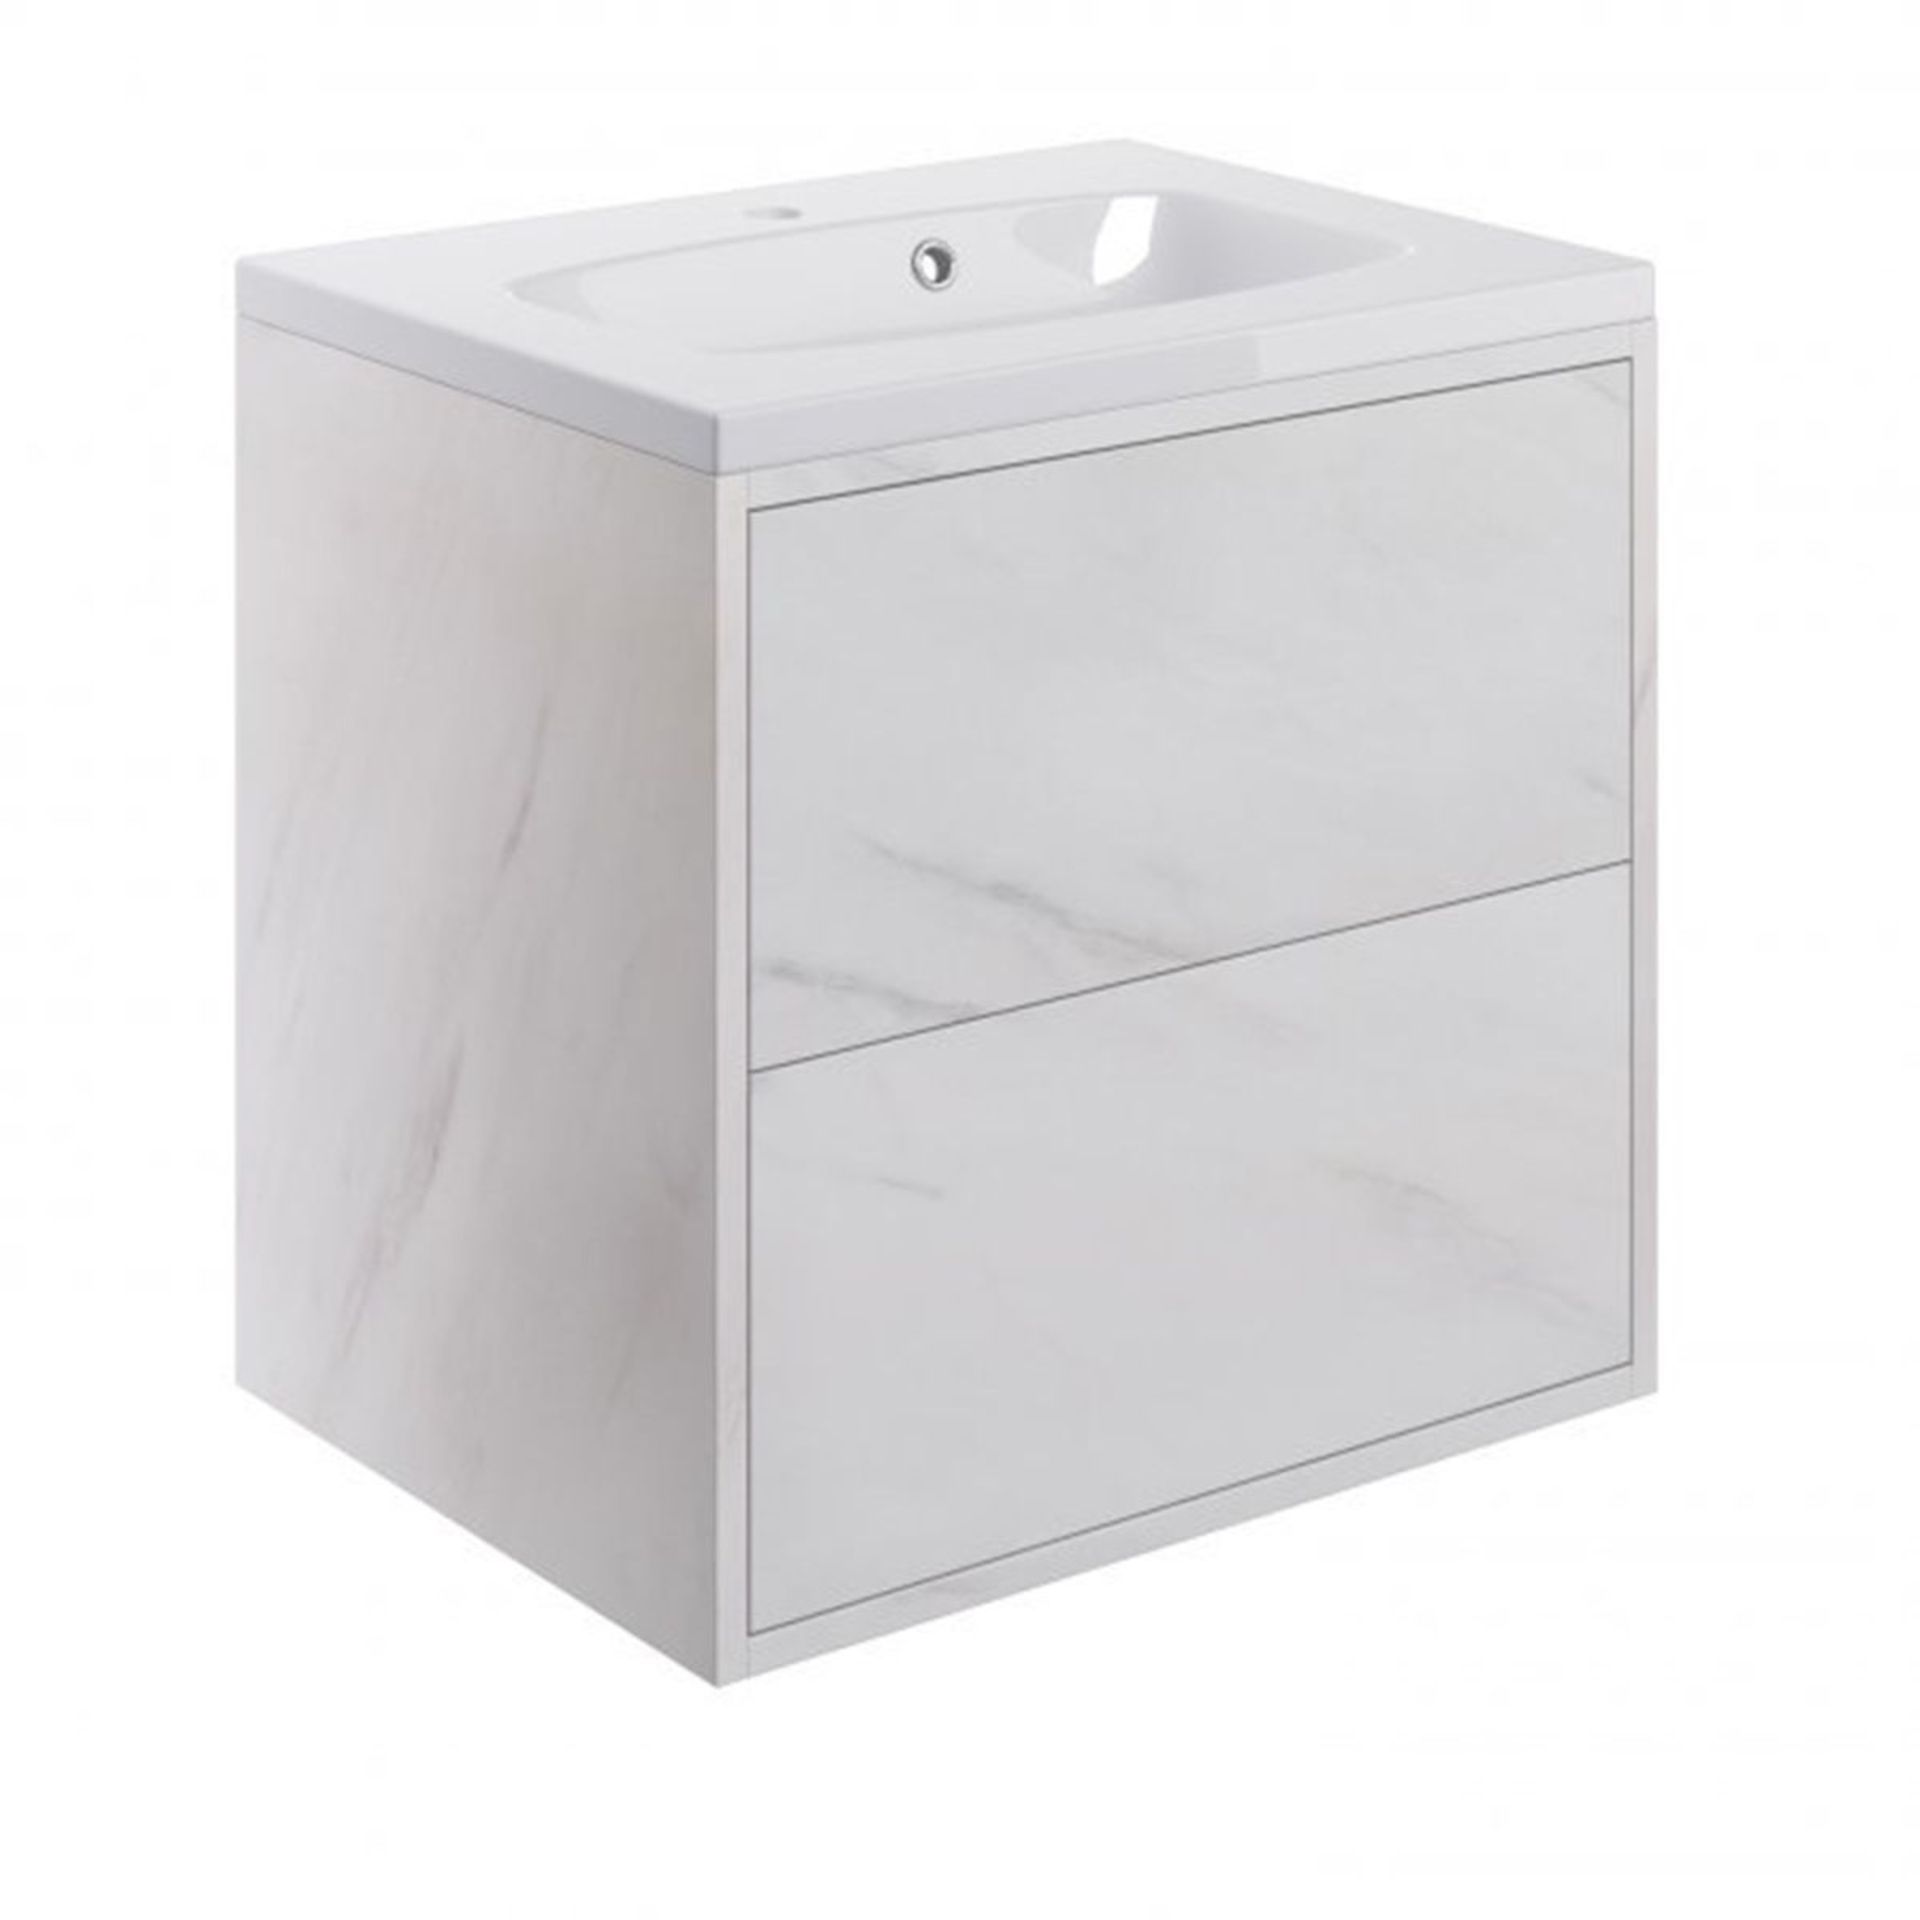 NEW (C185) Perla Marble 600mm 2 Drawer Wall Hung Vanity Unit. 18mm durable cabinet with push-to... - Image 2 of 2